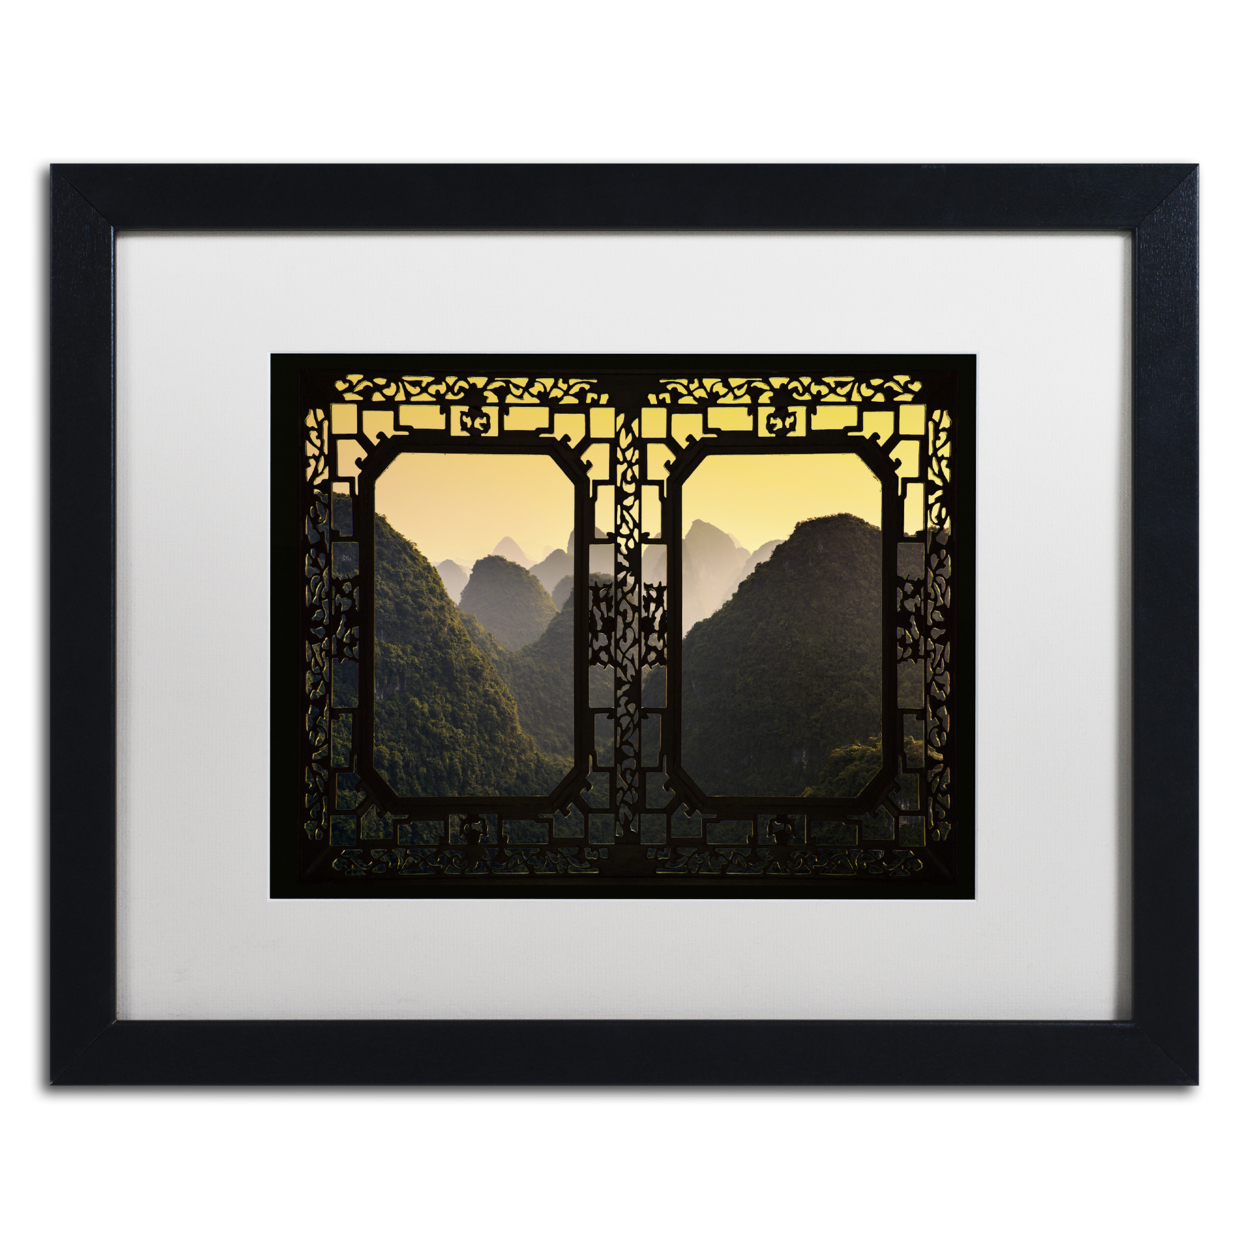 Philippe Hugonnard 'Mountain View' Black Wooden Framed Art 18 X 22 Inches